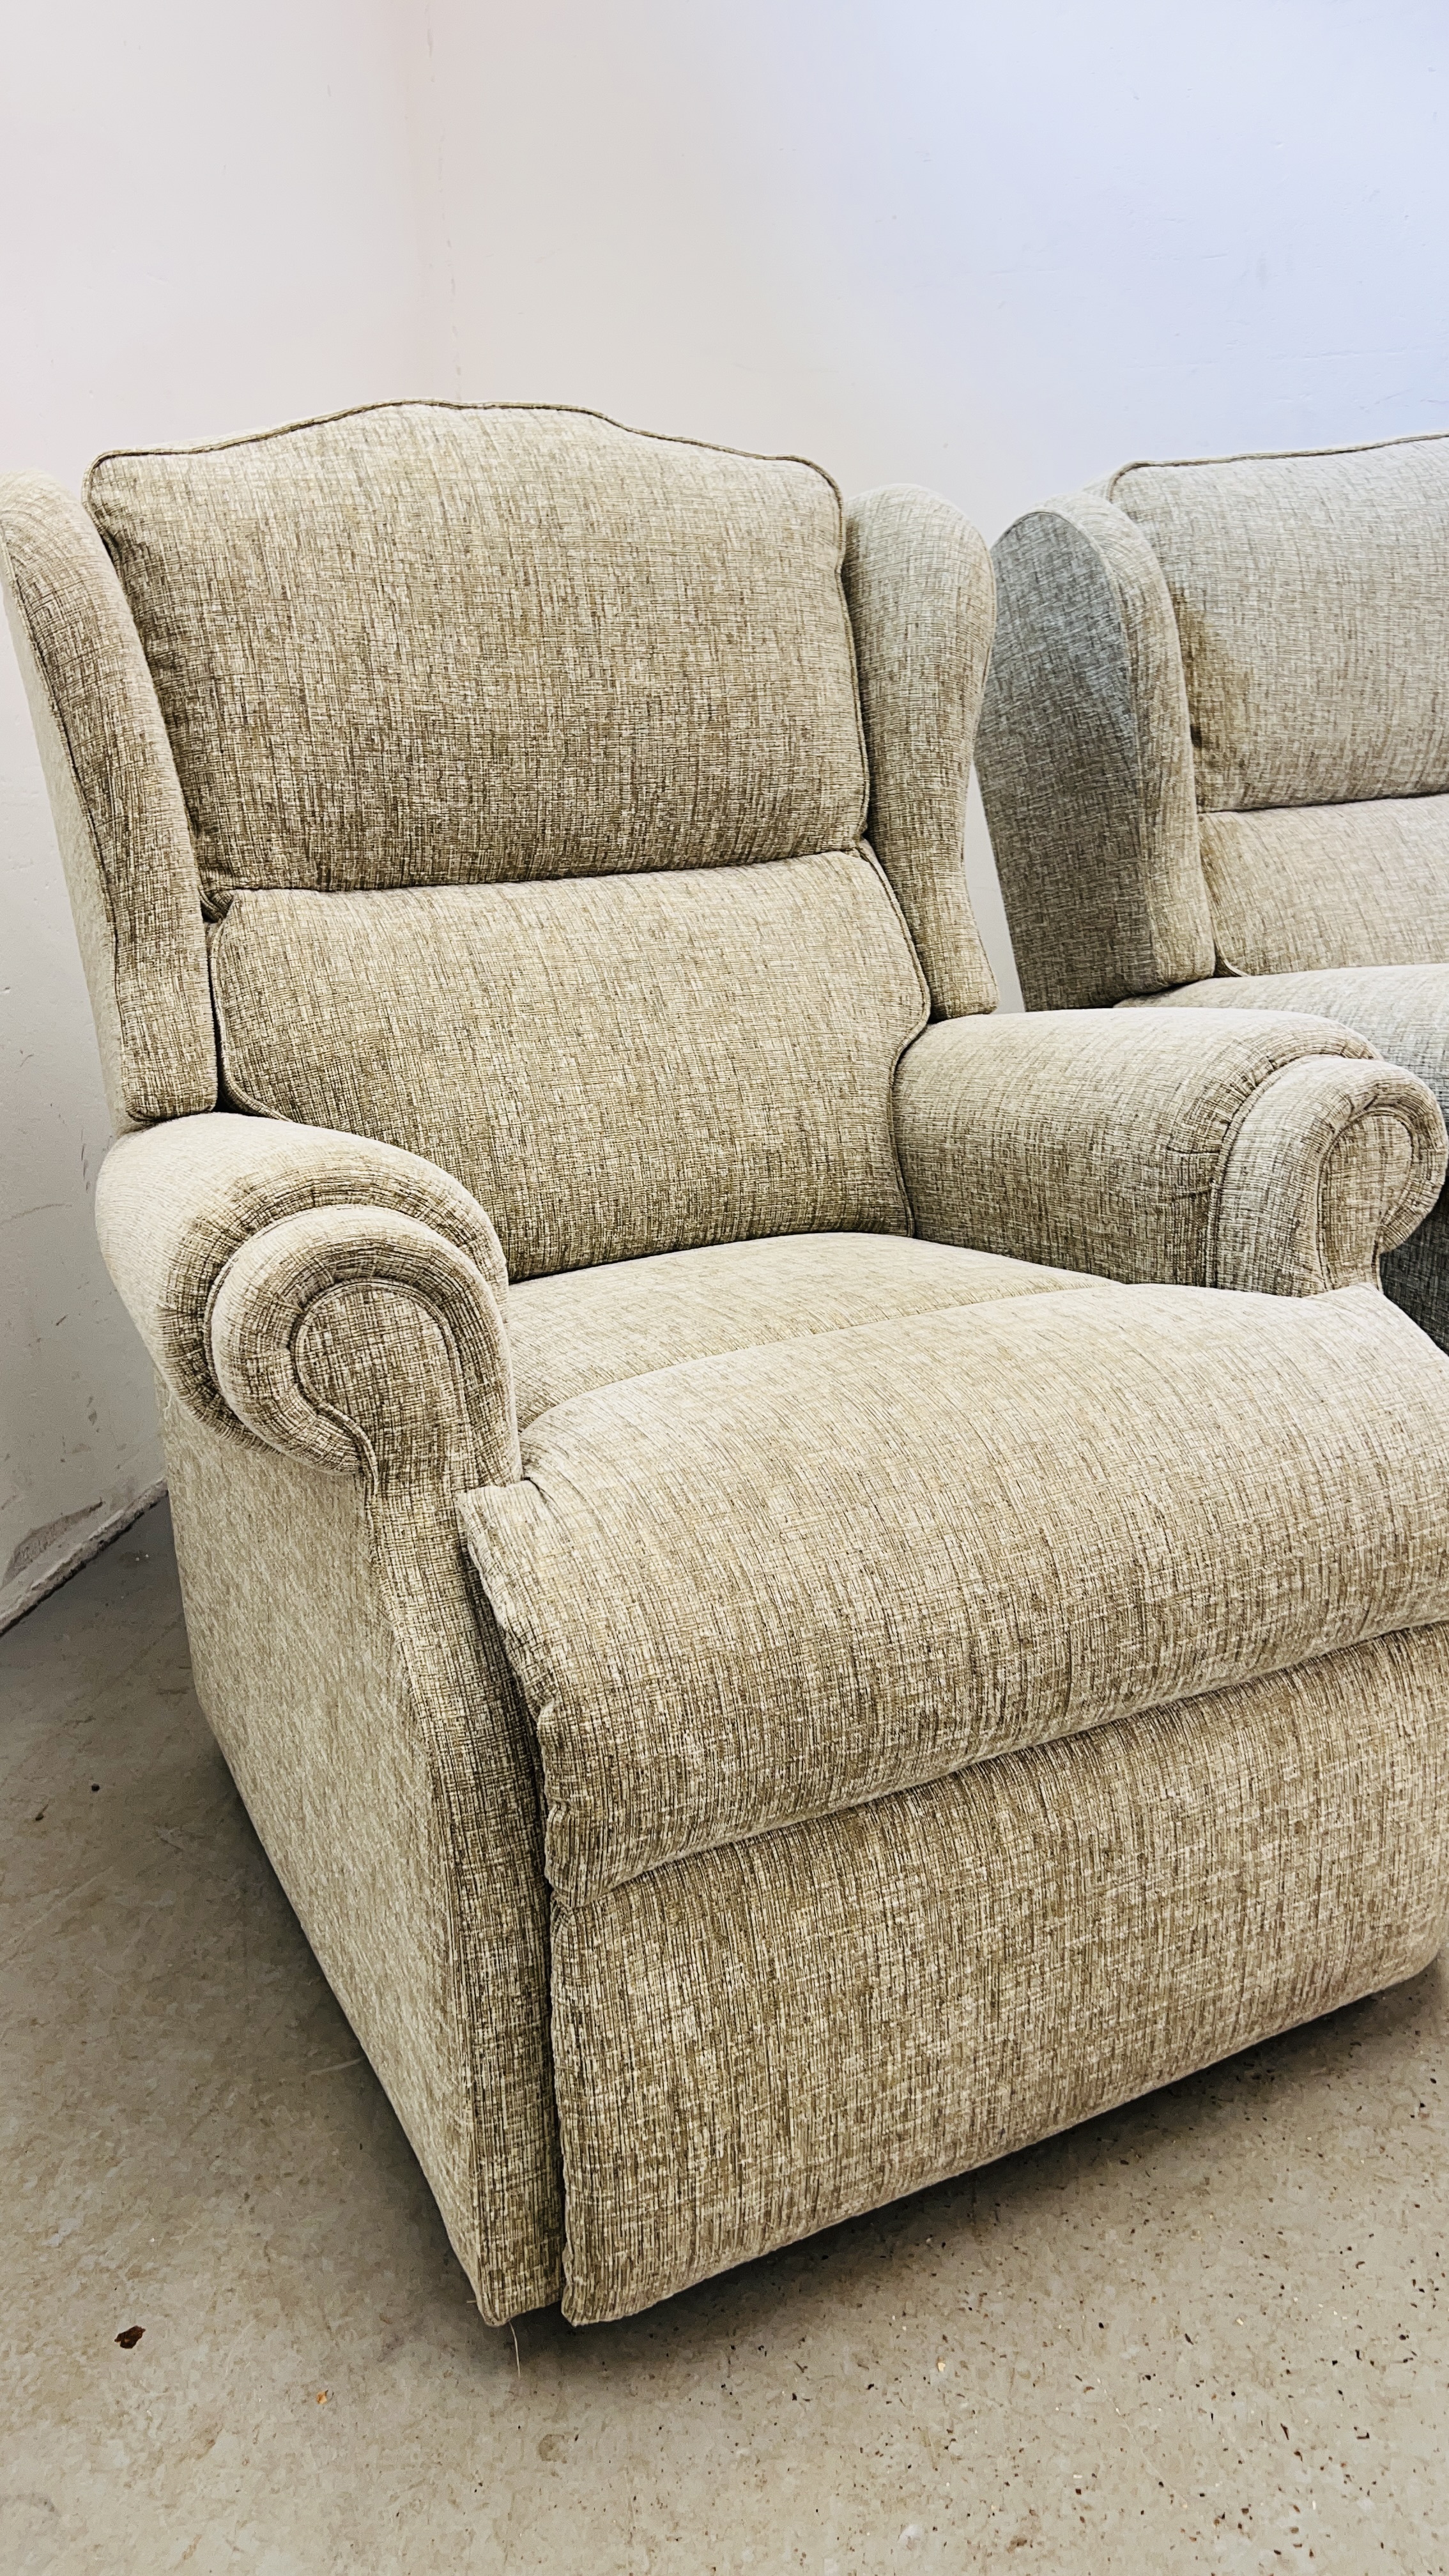 A GOOD QUALITY "SHERBORNE" TWO SEATER SOFA W 140CM X D 82CM X H 94CM ALONG WITH A MATCHING ARMCHAIR. - Image 13 of 14